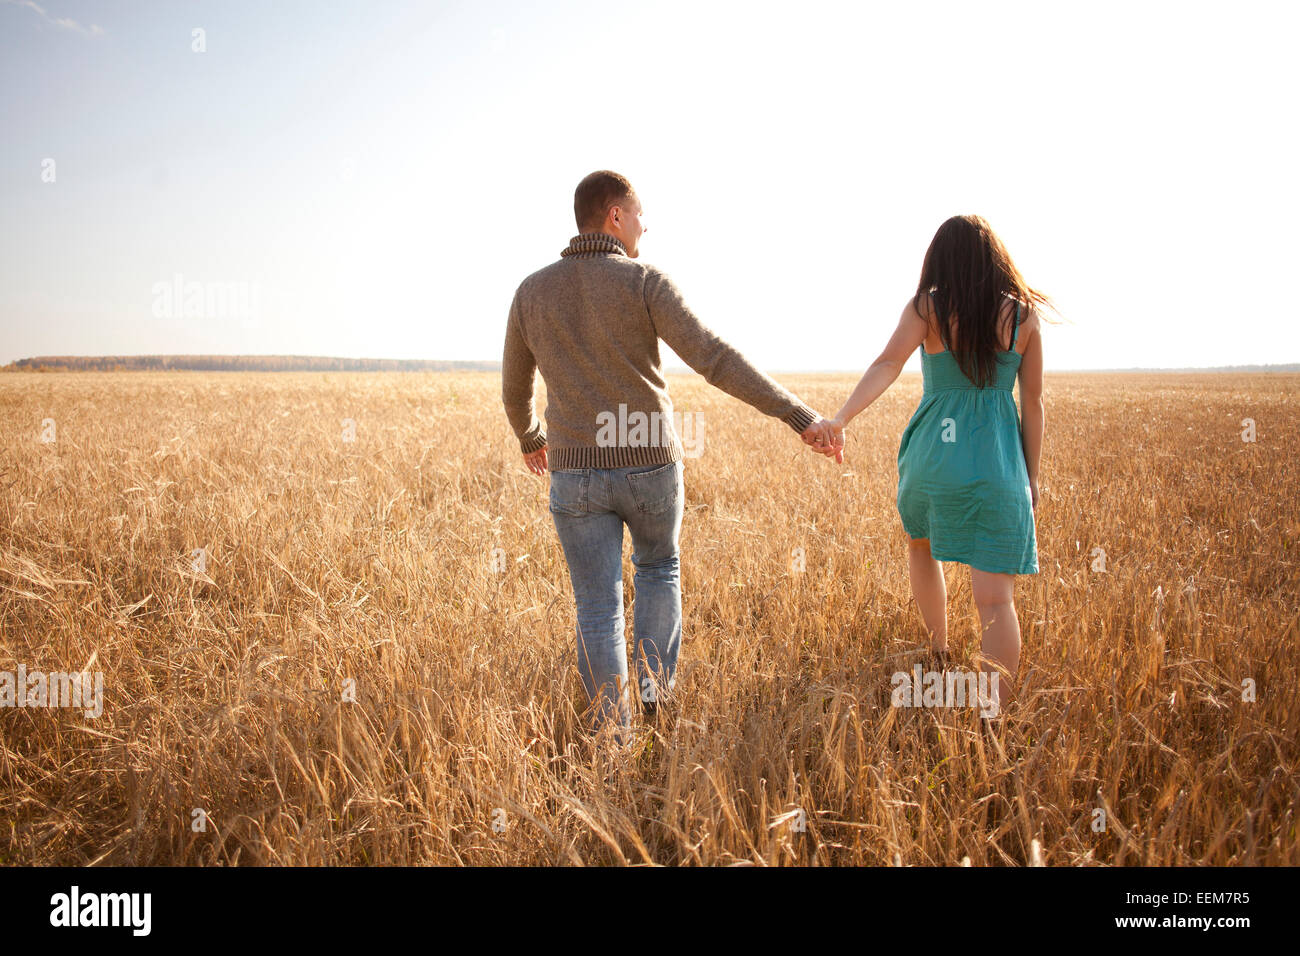 Caucasian couple holding hands in rural field Banque D'Images